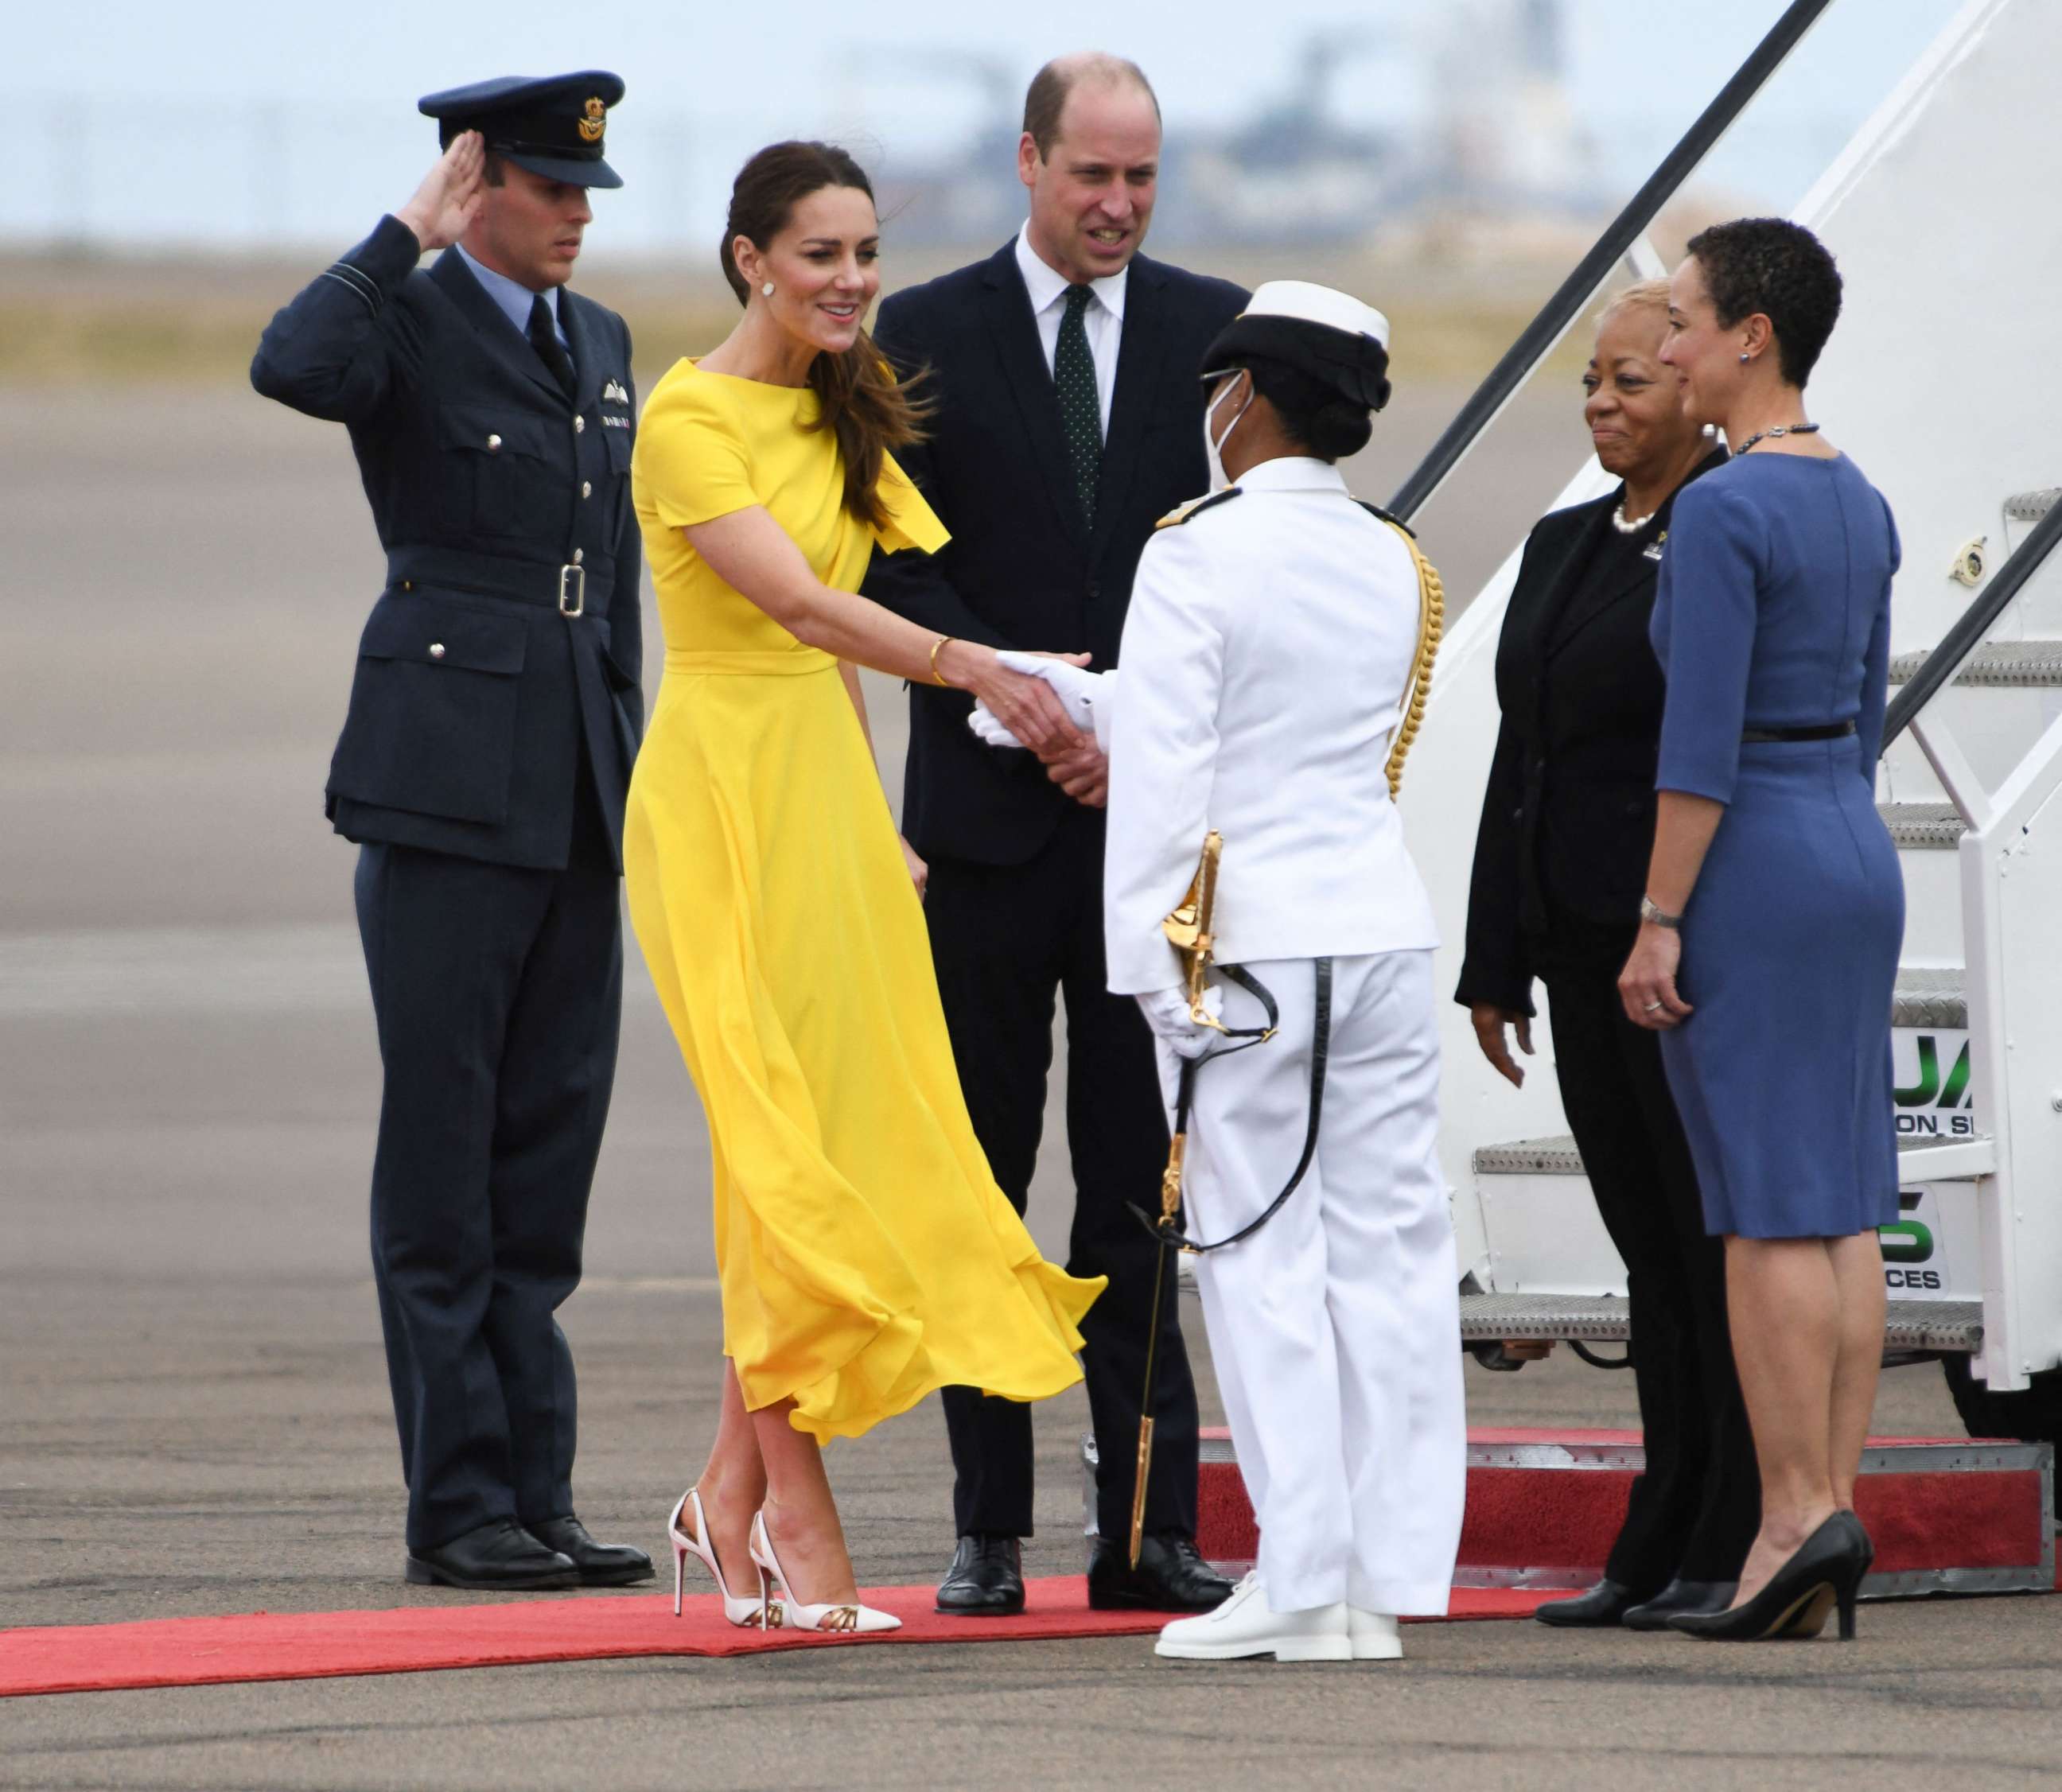 PHOTO: Prince William, Duke of Cambridge and his wife Catherine, Duchess of Cambridge, are greeted by officials upon arrival in Jamaica on March 22, 2022.